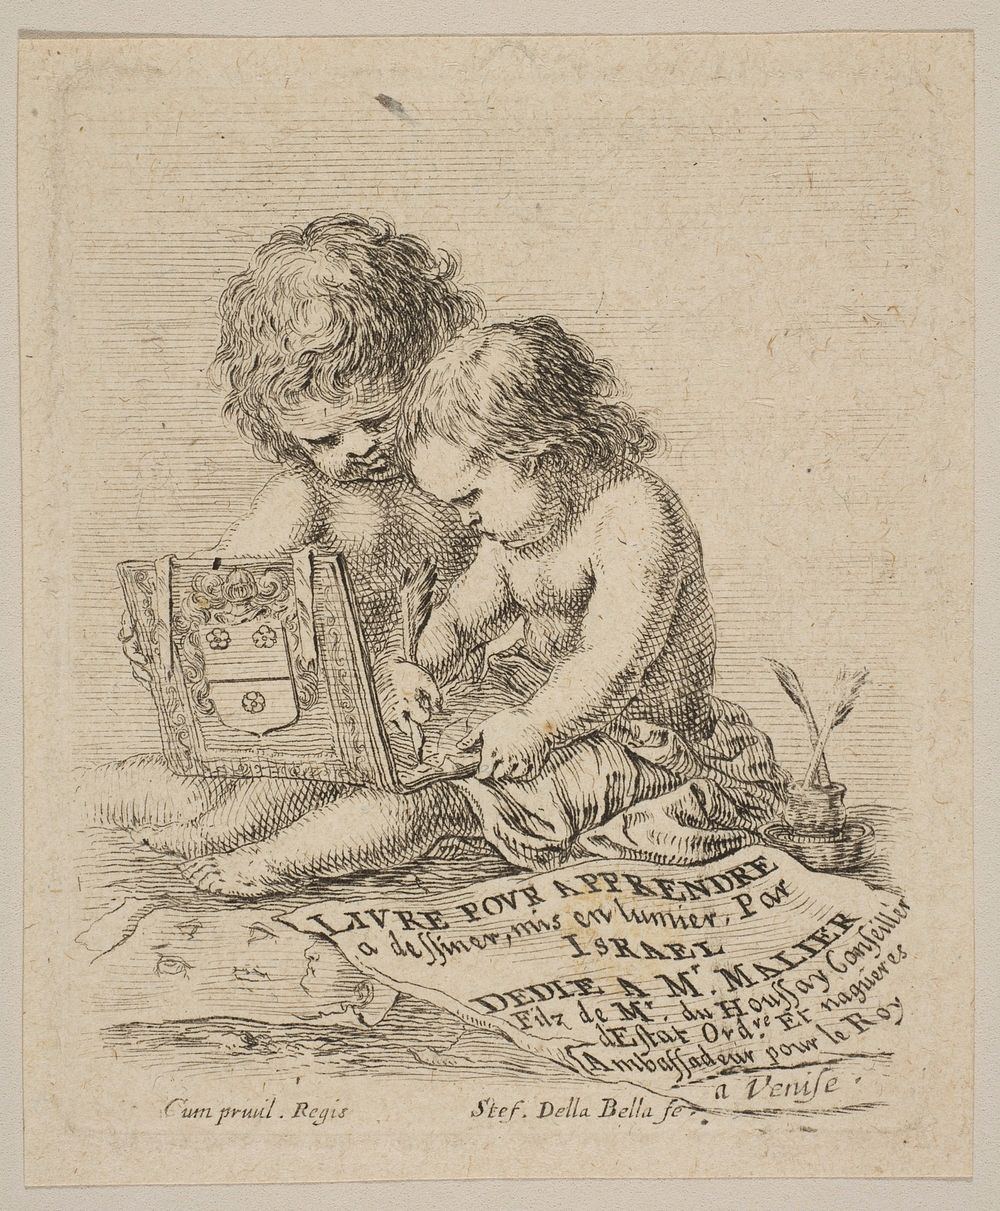 Plate 1: two children sitting on the ground, the child on the right drawing while the child on the left holding the album…